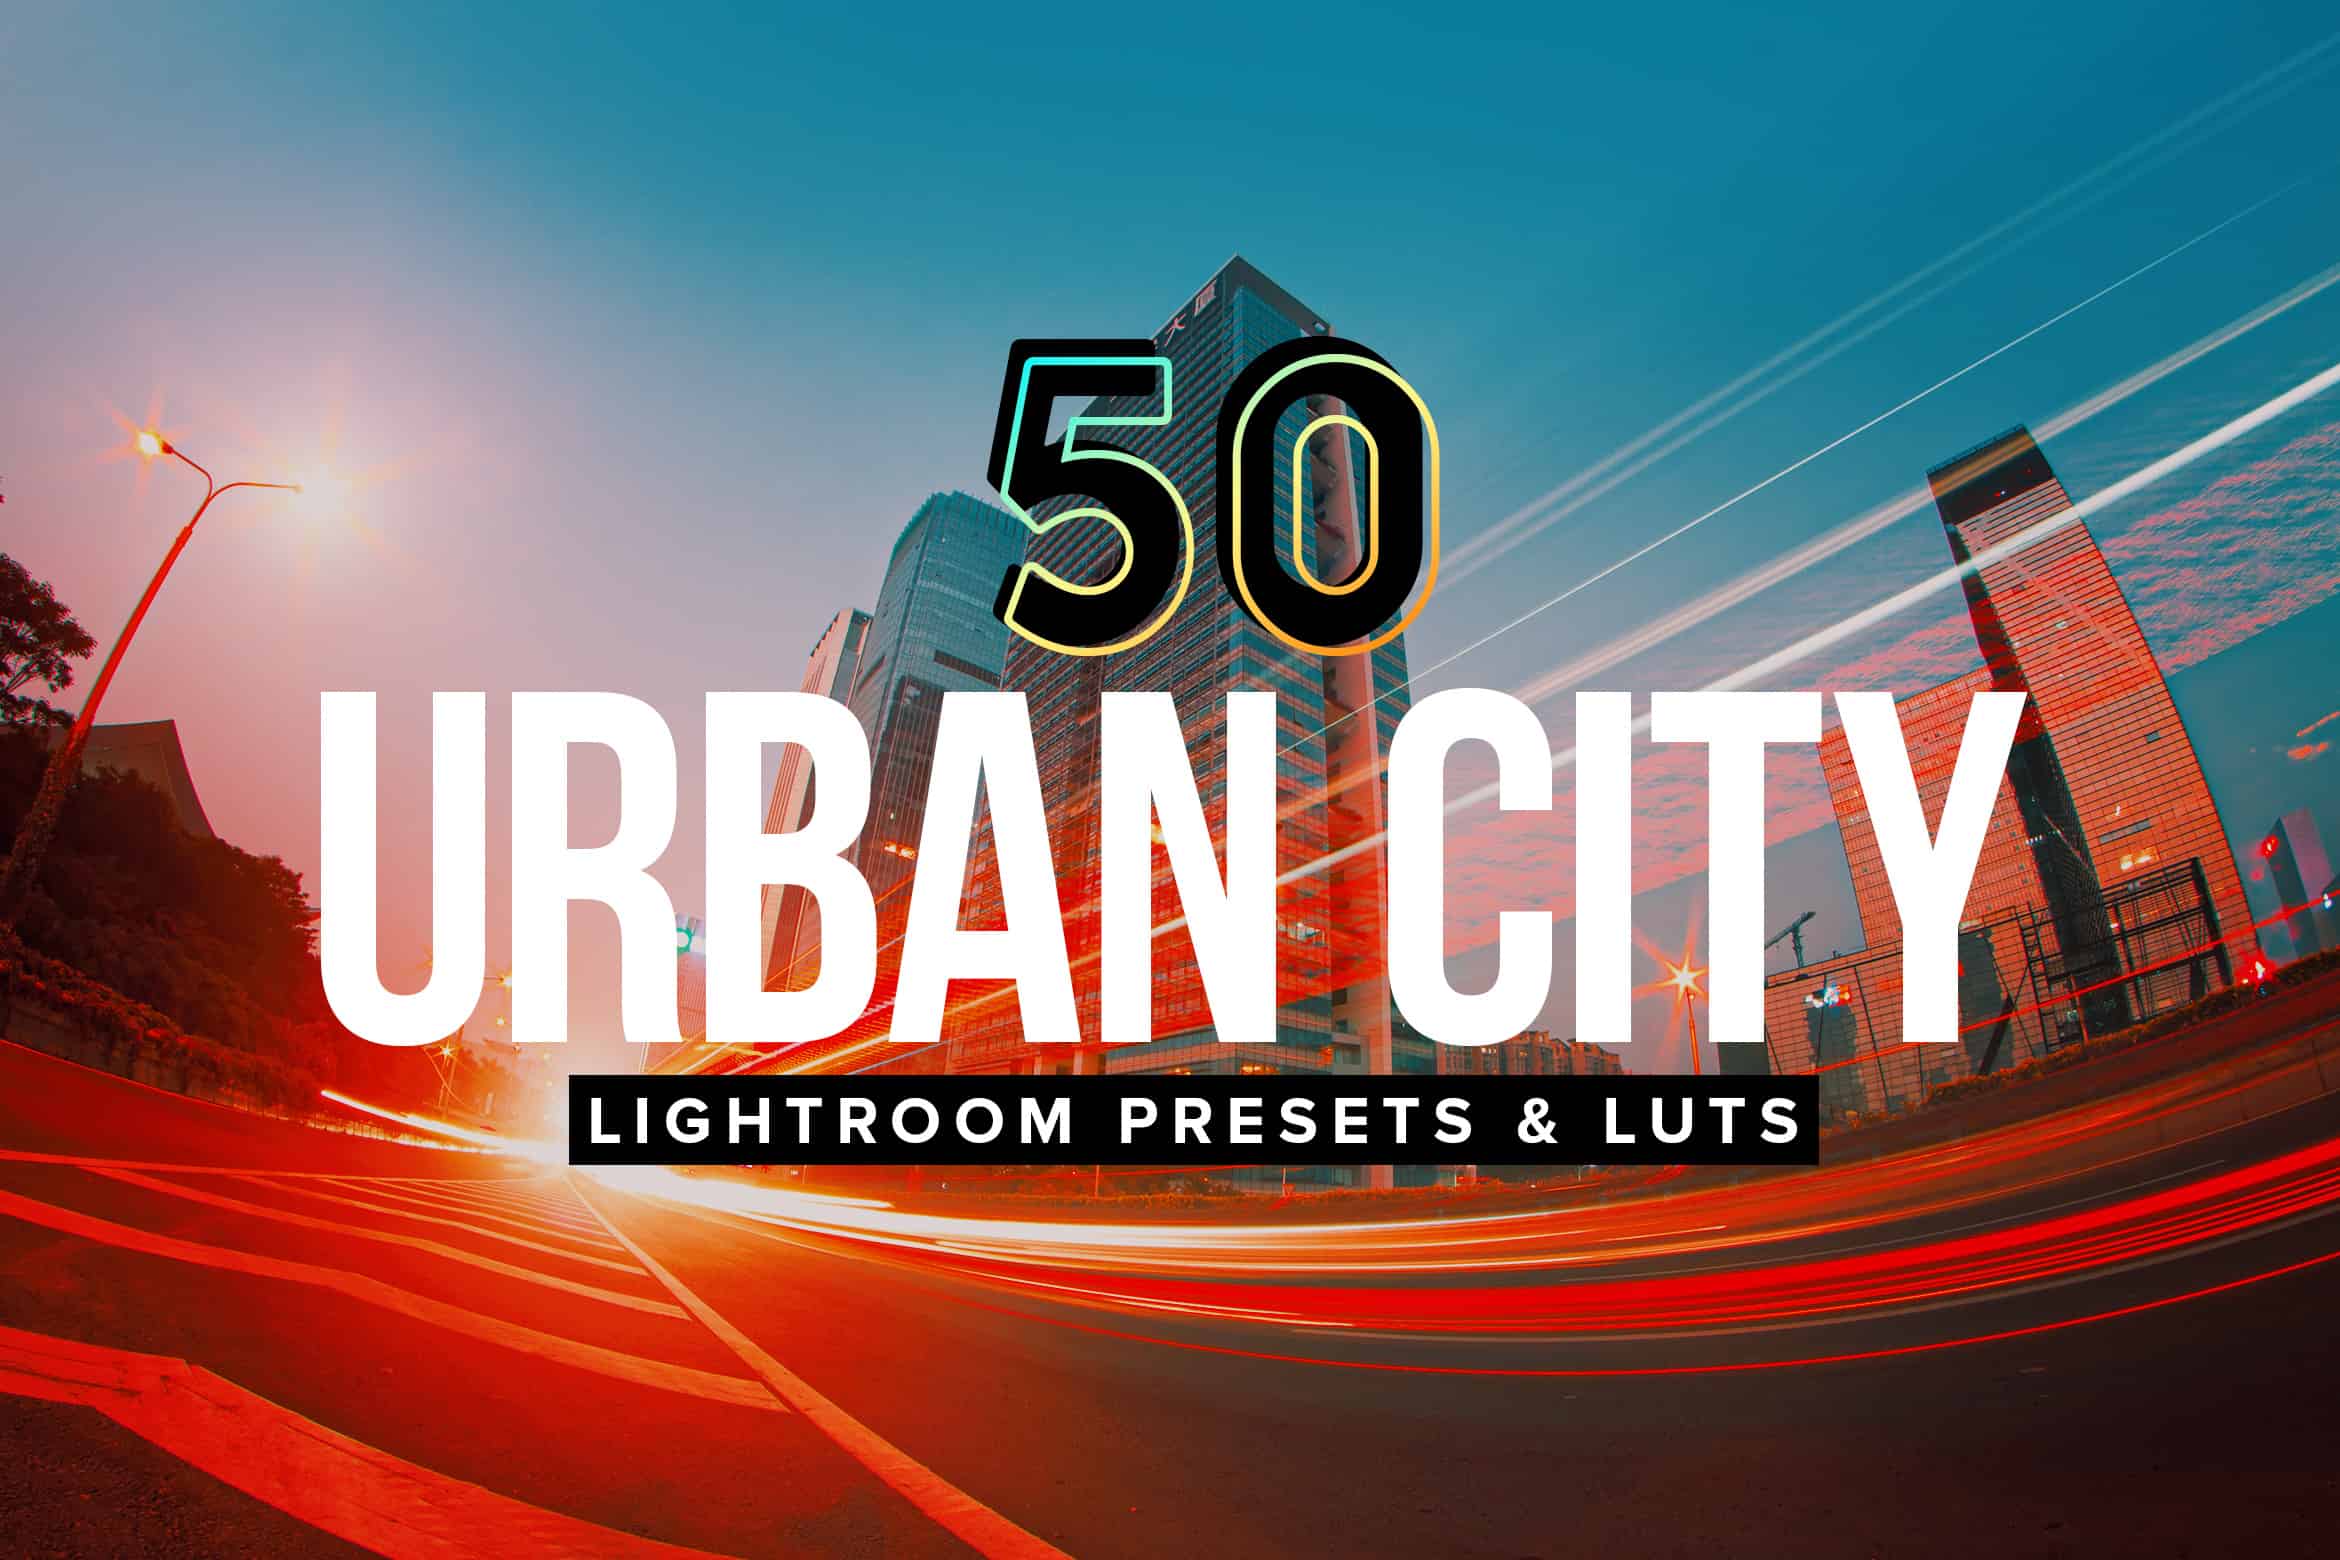 50 Urban City Lightroom Presets and LUTs